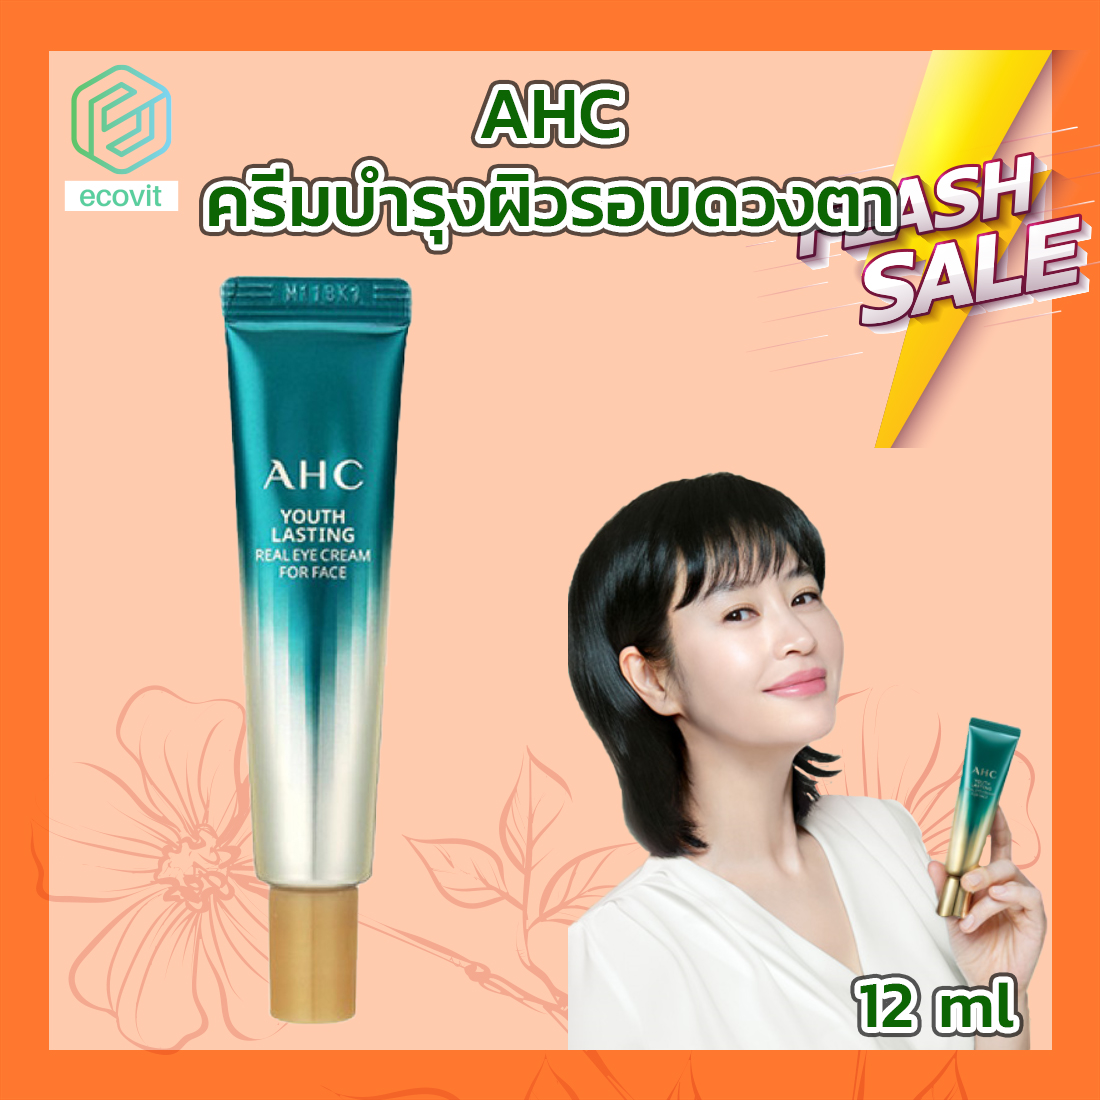 AHC youth lasting real eye cream for face [12ml]